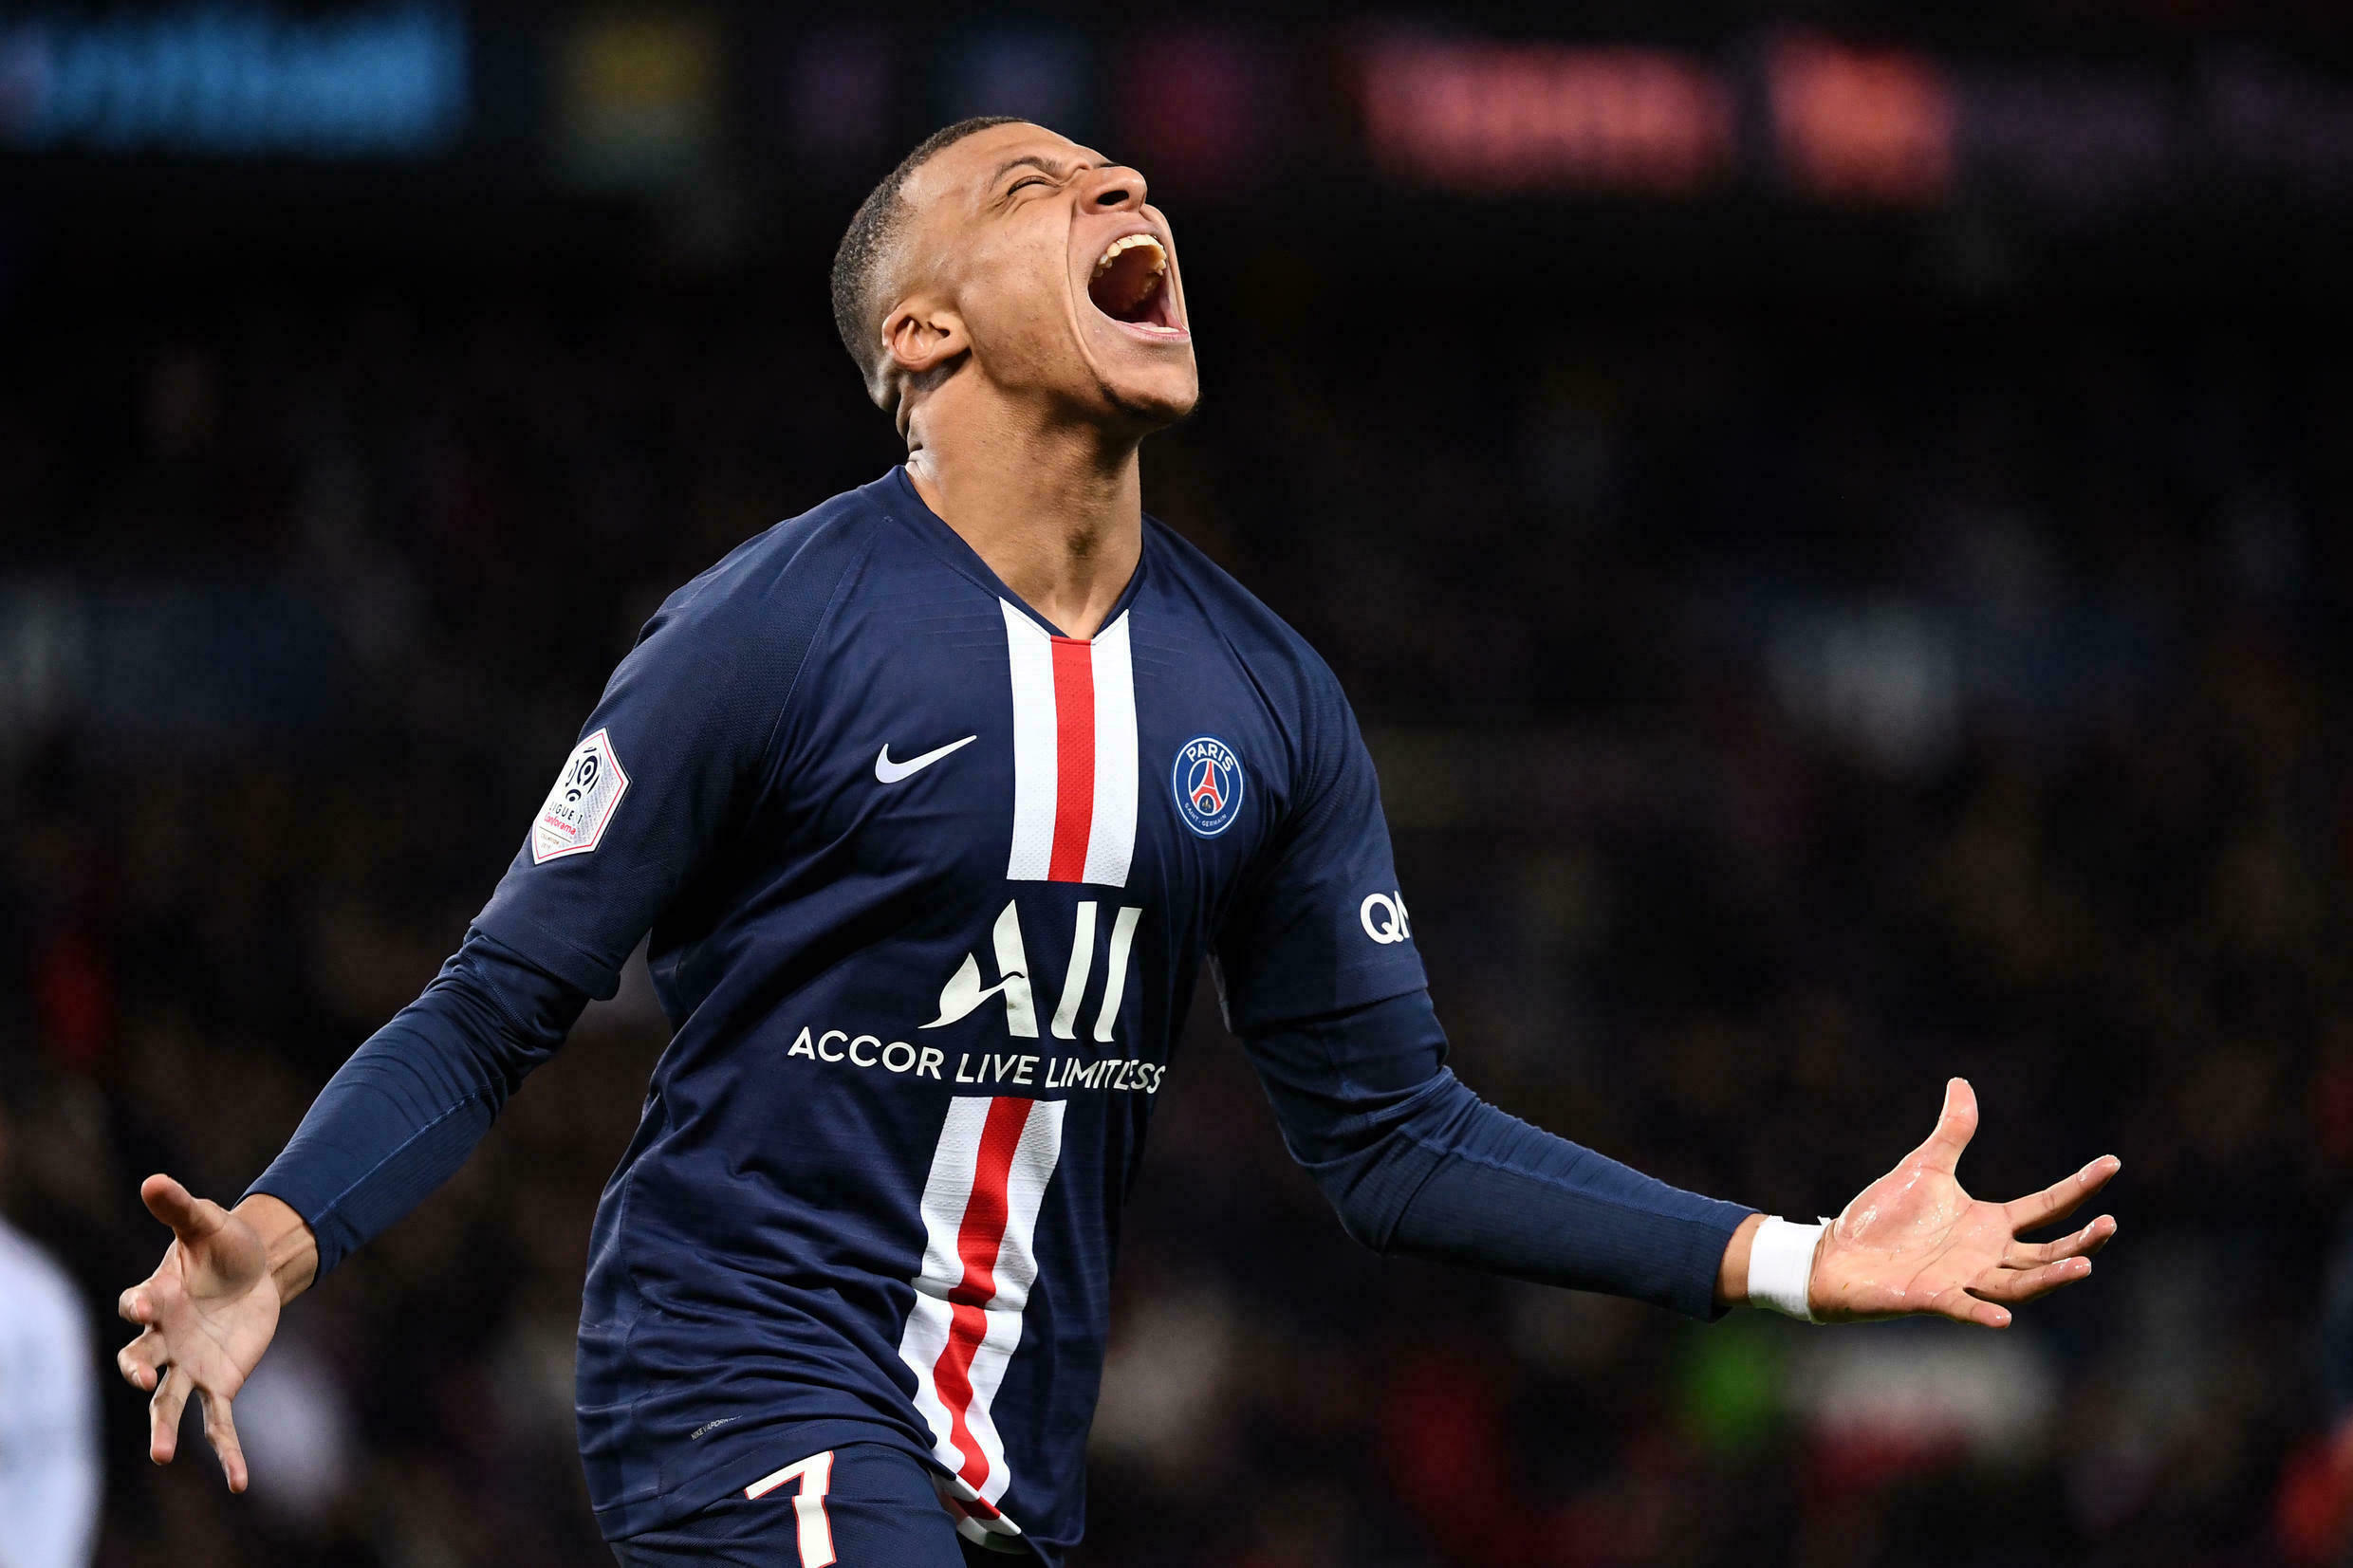  PSG: Mbappe wants to move to Madrid